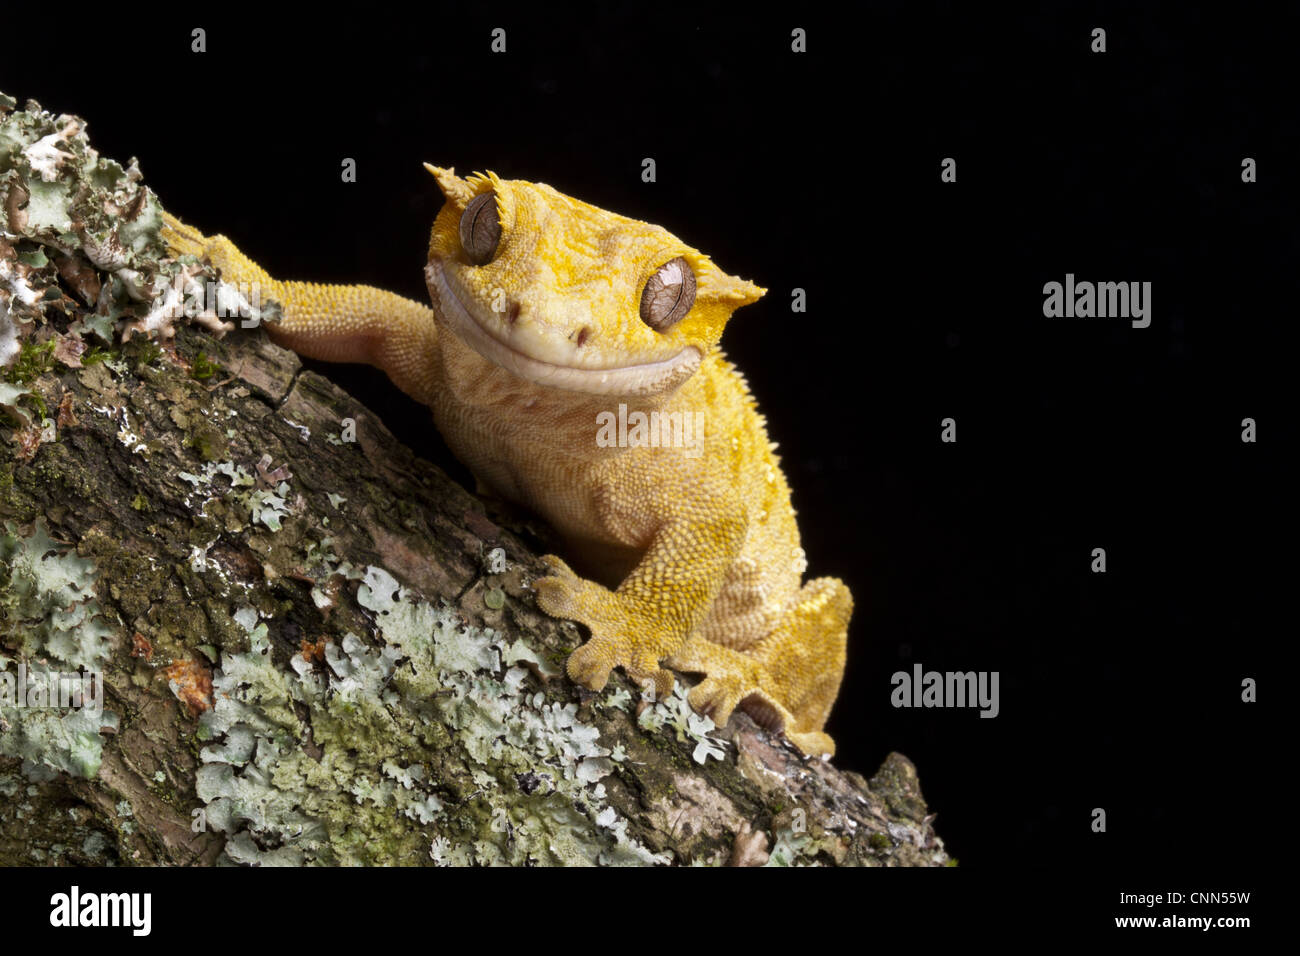 New Caledonian Crested Gecko (Rhacodactylus ciliatus) adult, resting on branch, New Caledonia Stock Photo